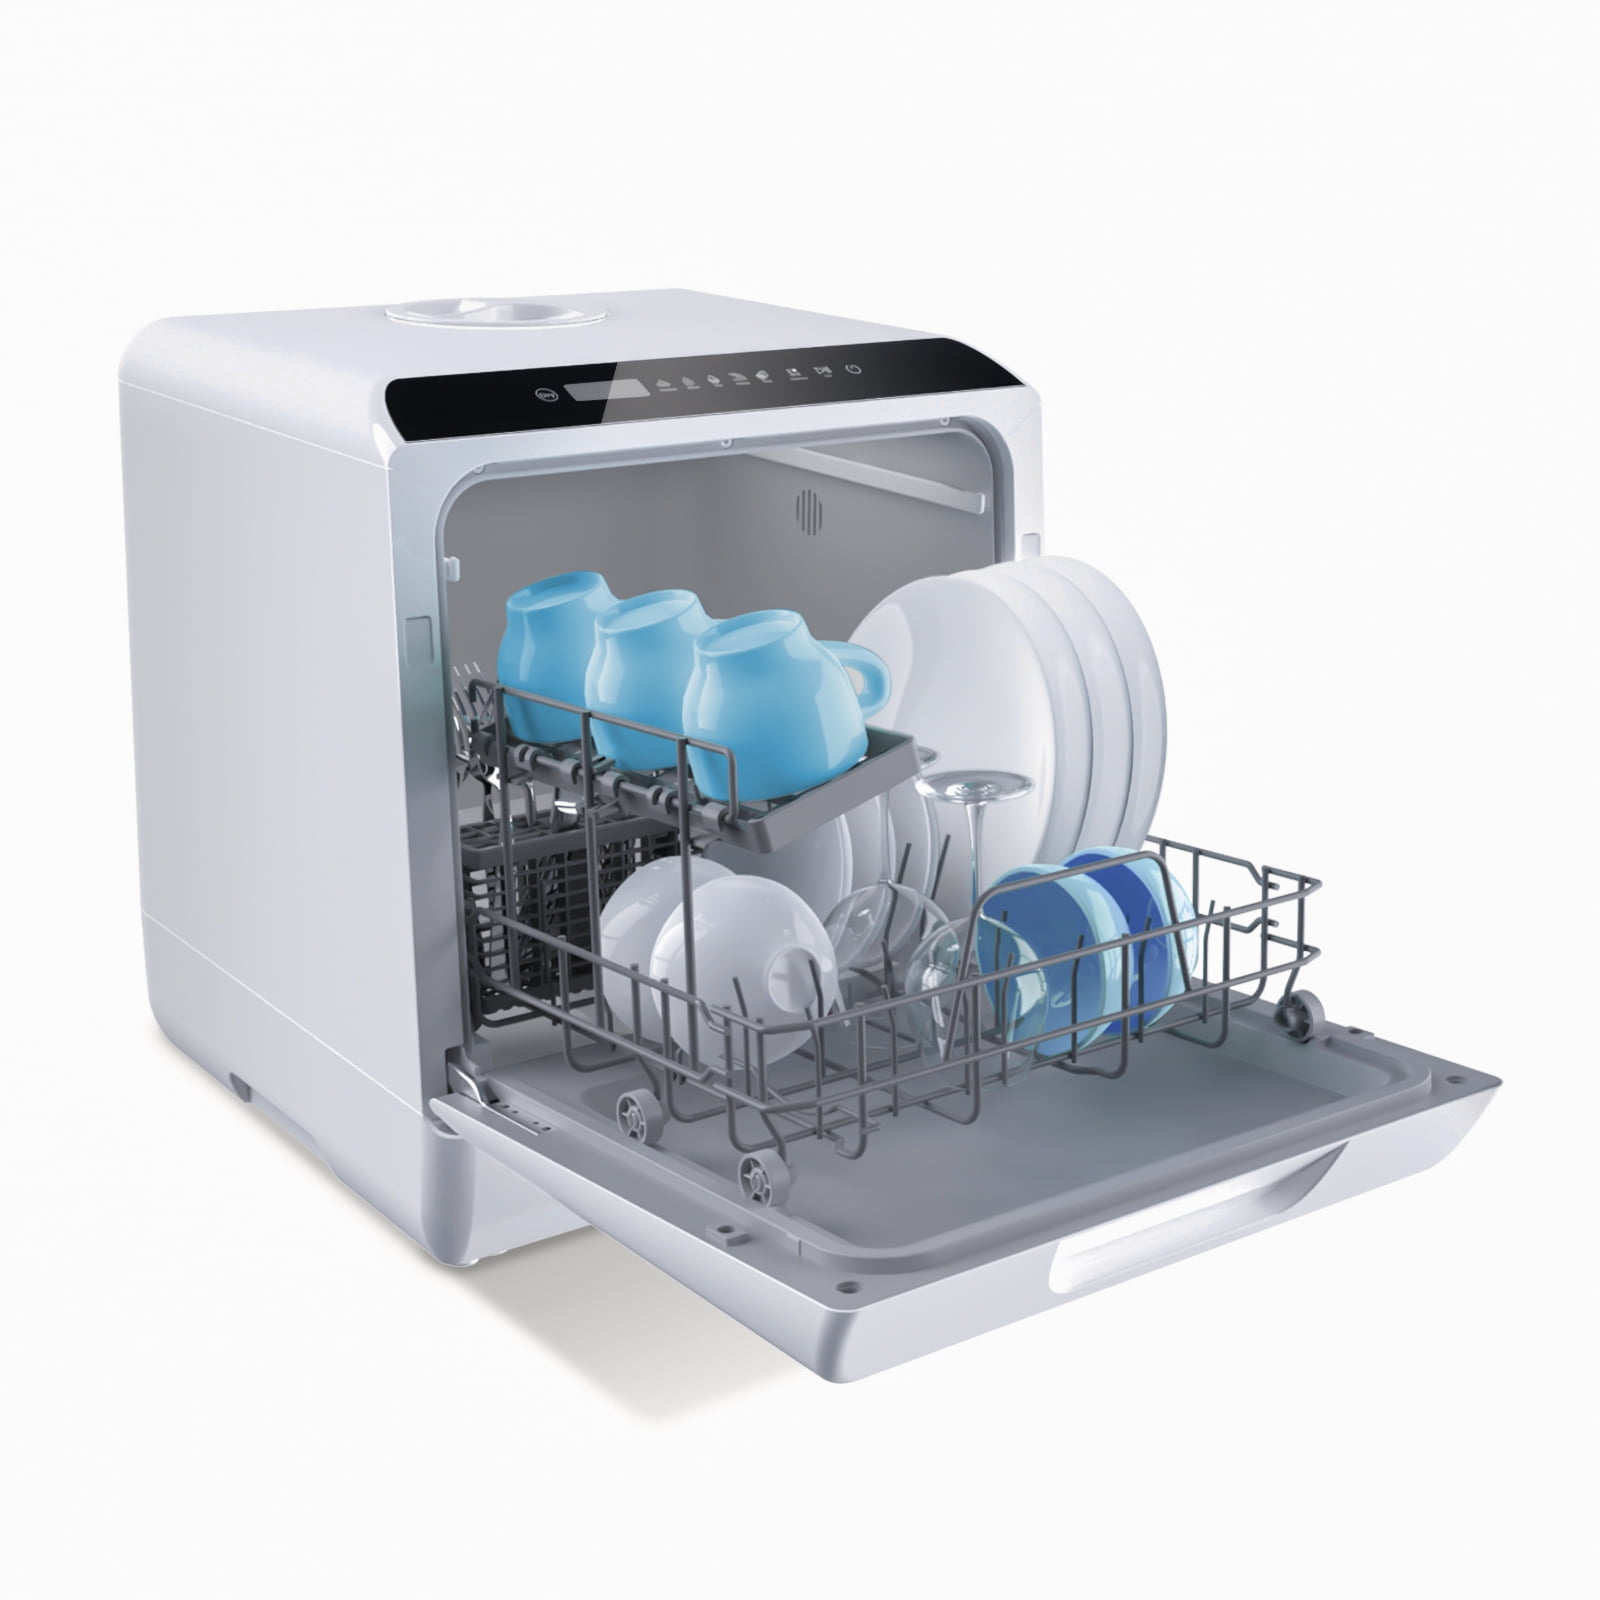 IAGREEA Portable Countertop Dishwasher, No Hookup Needed With 5-Liter  Built-in Water Tank,5 Programs 